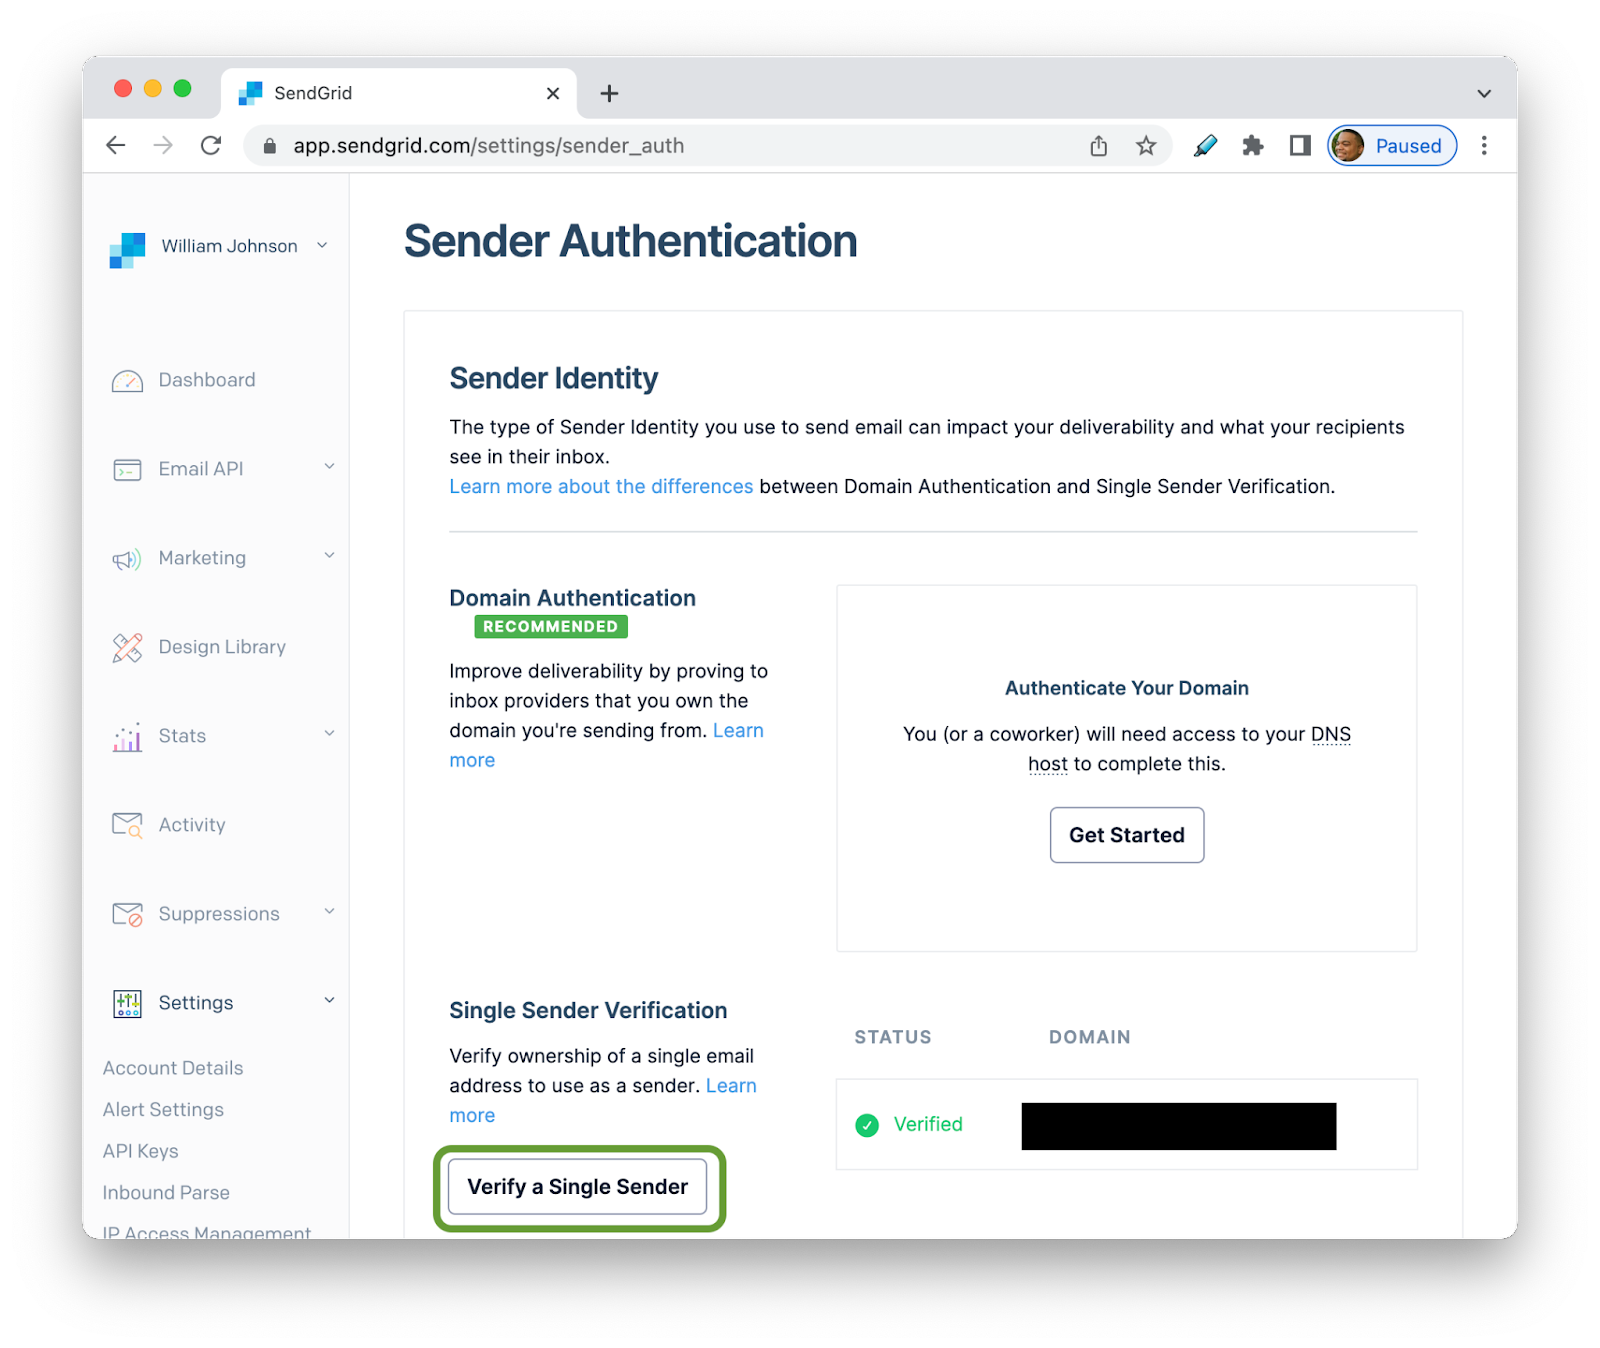 SendGrid"s Sender Authentication Page with Verify a Single Sender button highlighted